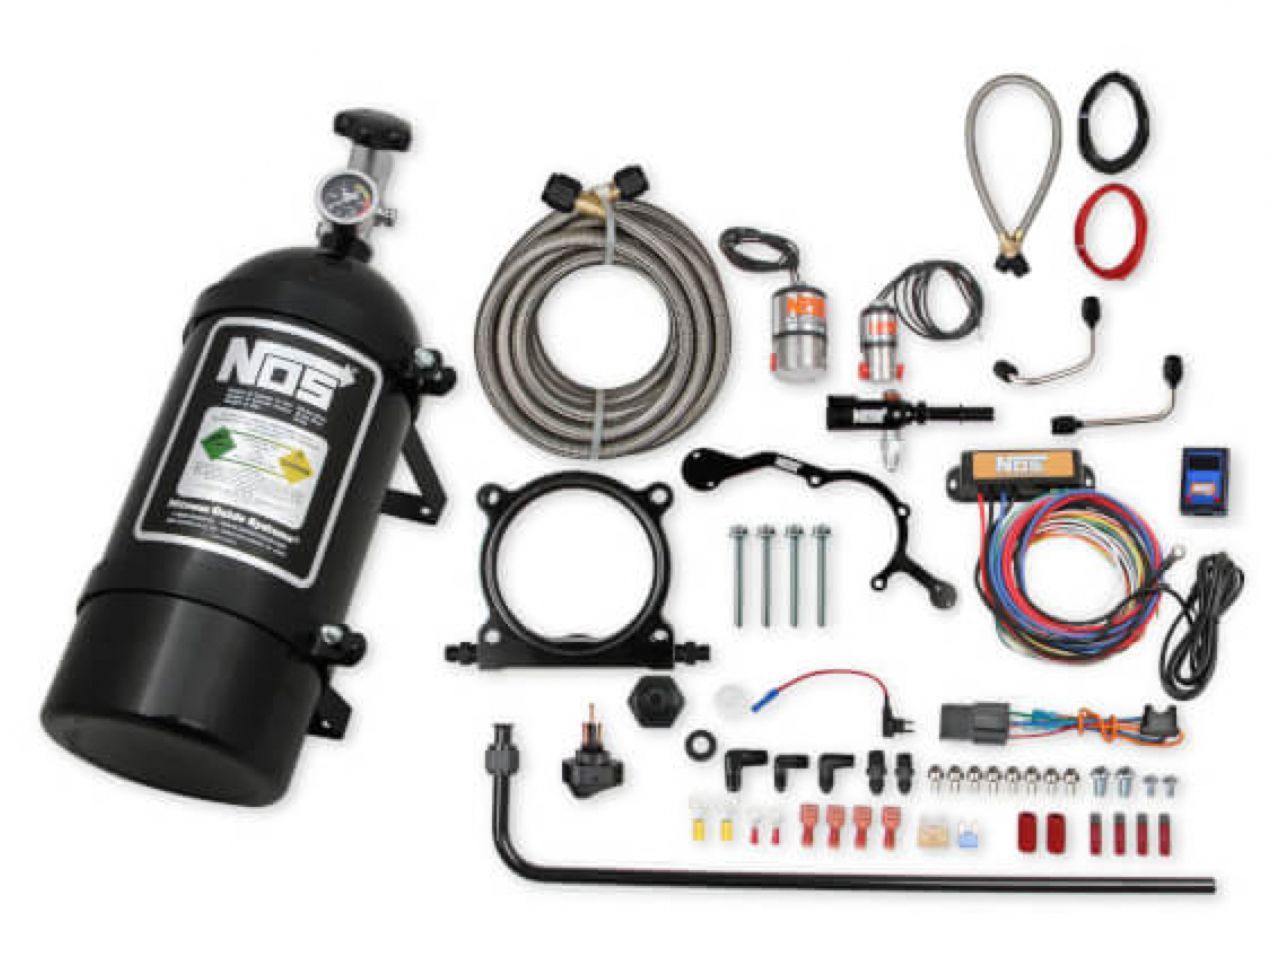 NOS Nitrous Oxide Kits and Accessories 02126BNOS Item Image